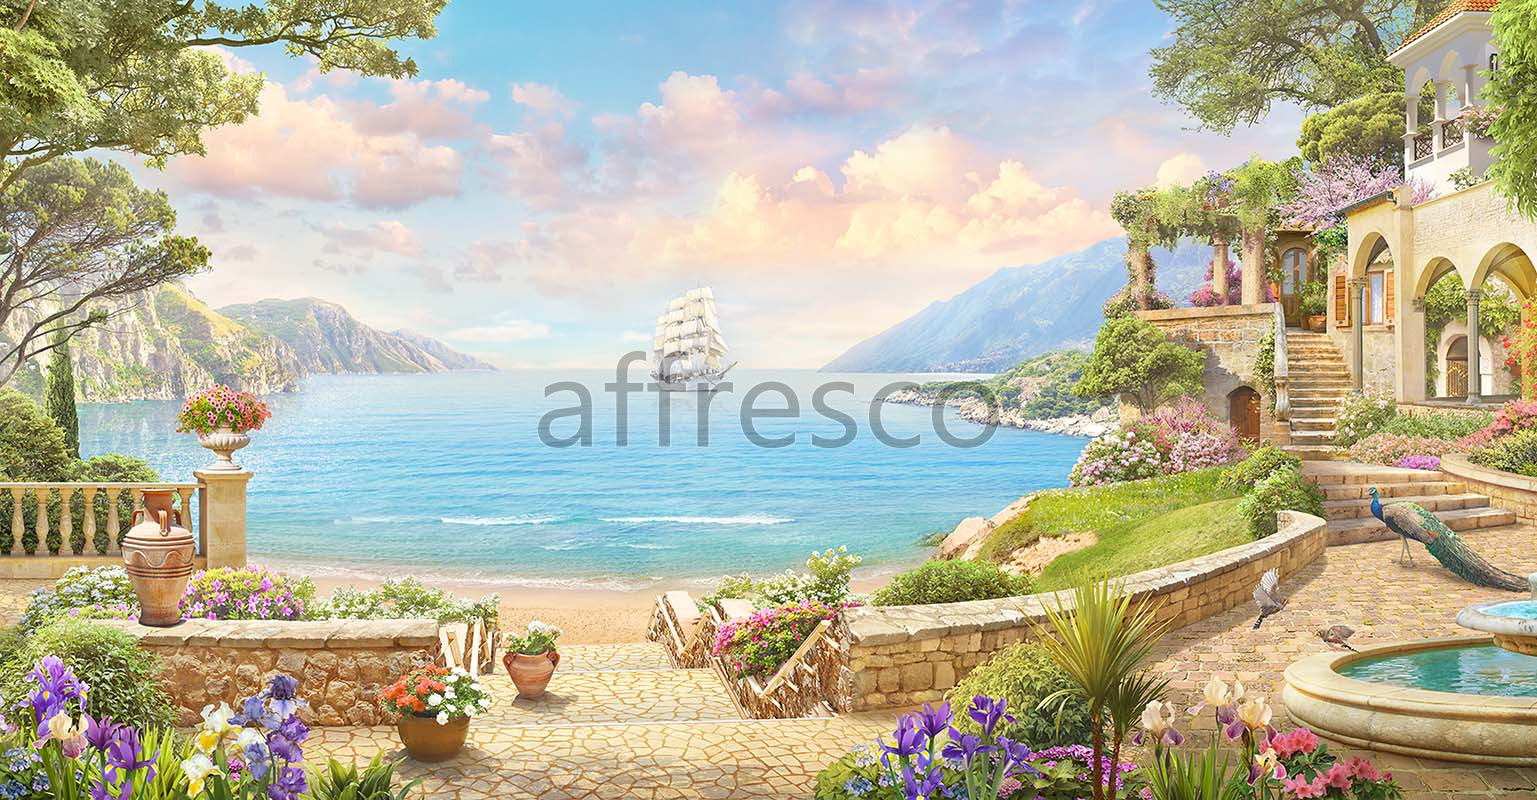 6873 | The best landscapes | Sailboat in the distance | Affresco Factory